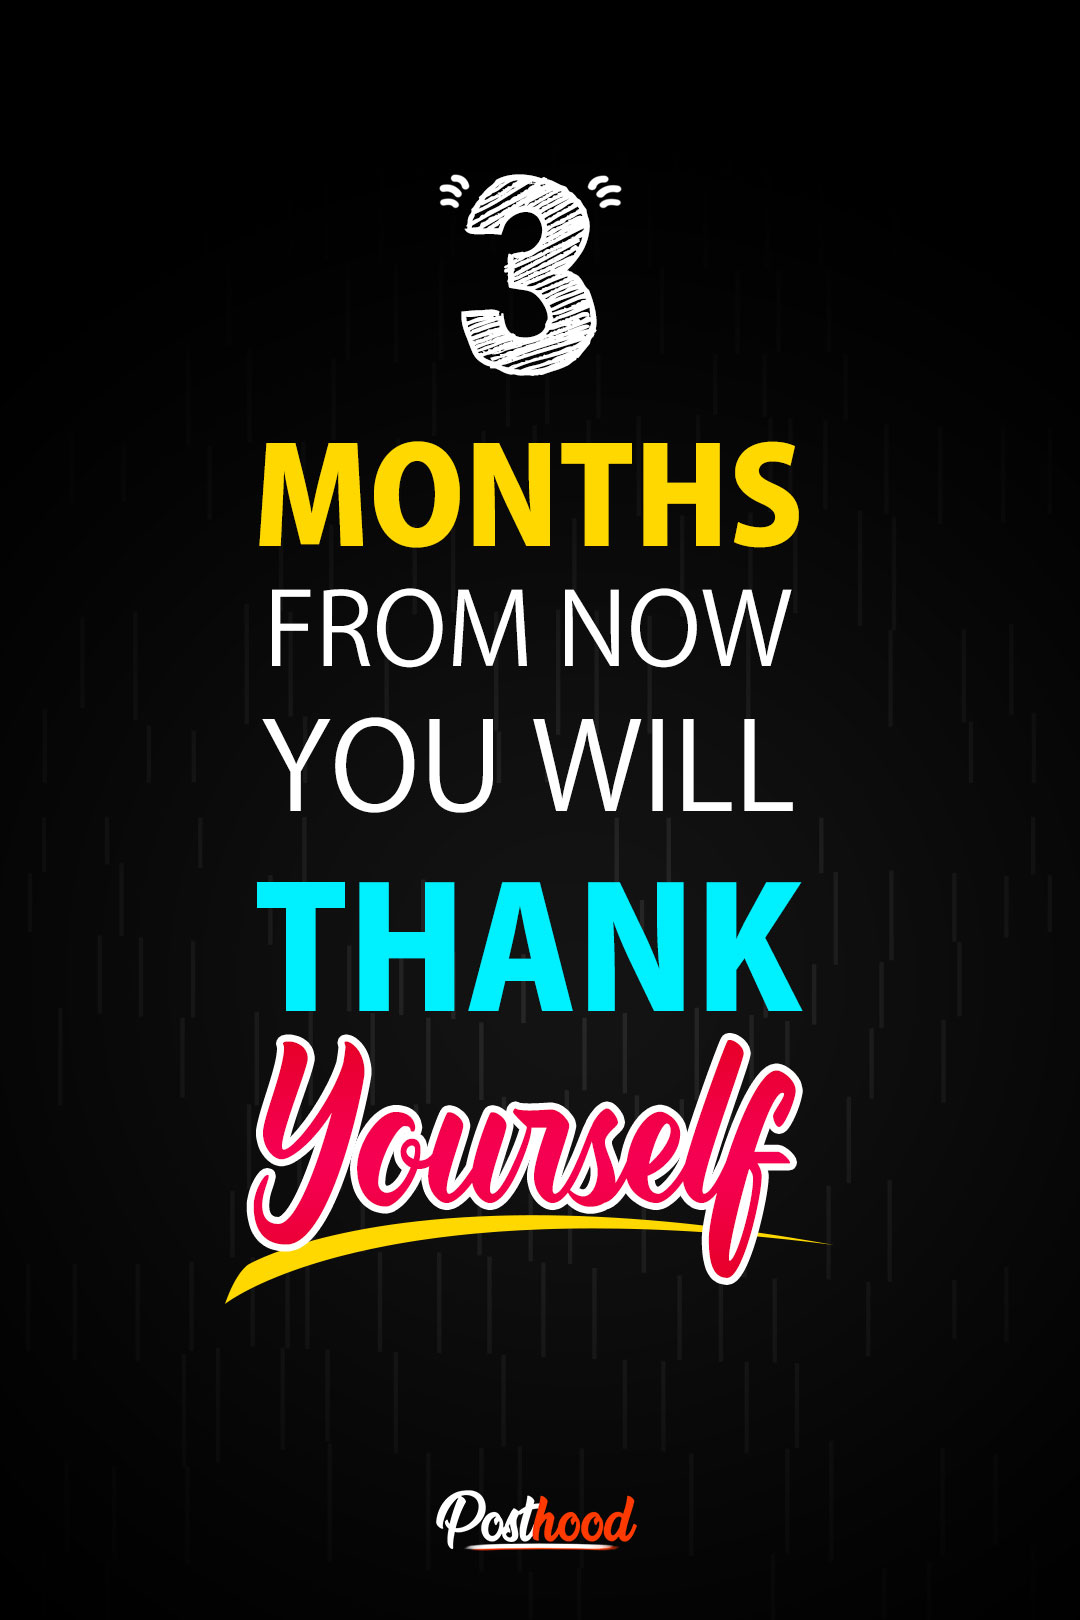 Three Months from now you will thank yourself. Fitness Motivation Quotes. Inspirational Fitness Motivation Quotes To Kick Your Workout Into Gear!